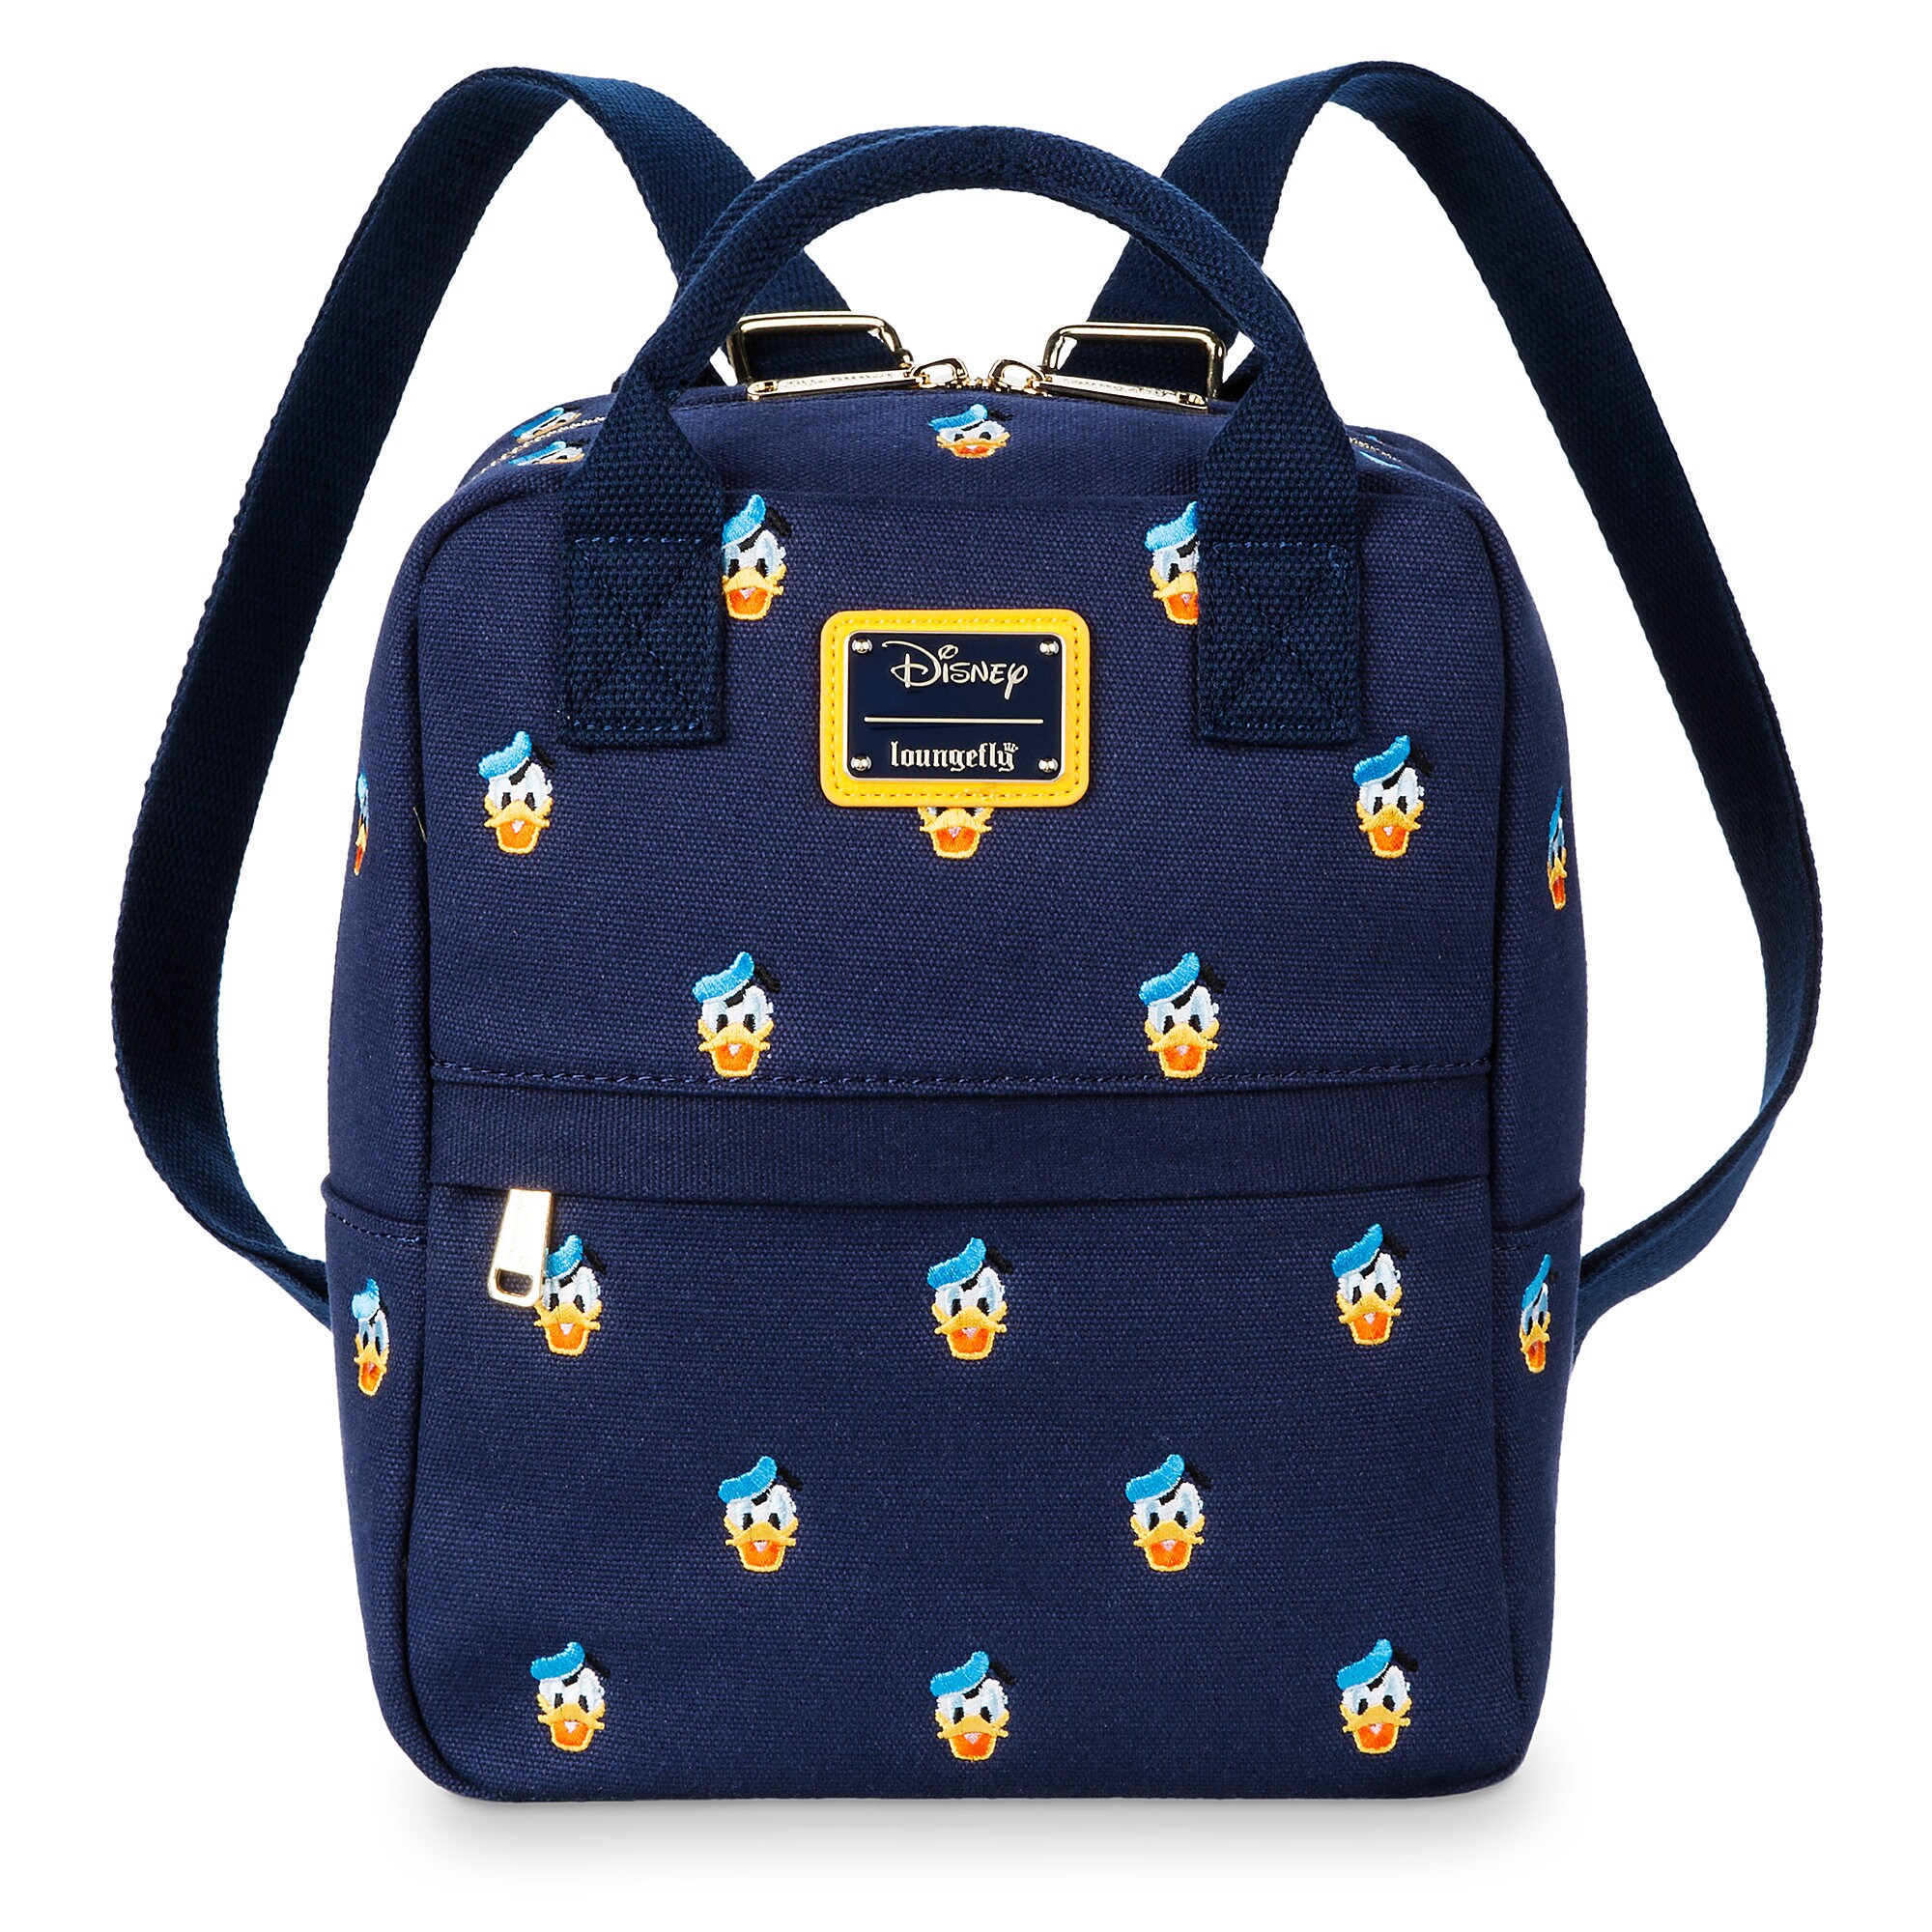 Donald Duck Backpack by Loungefly